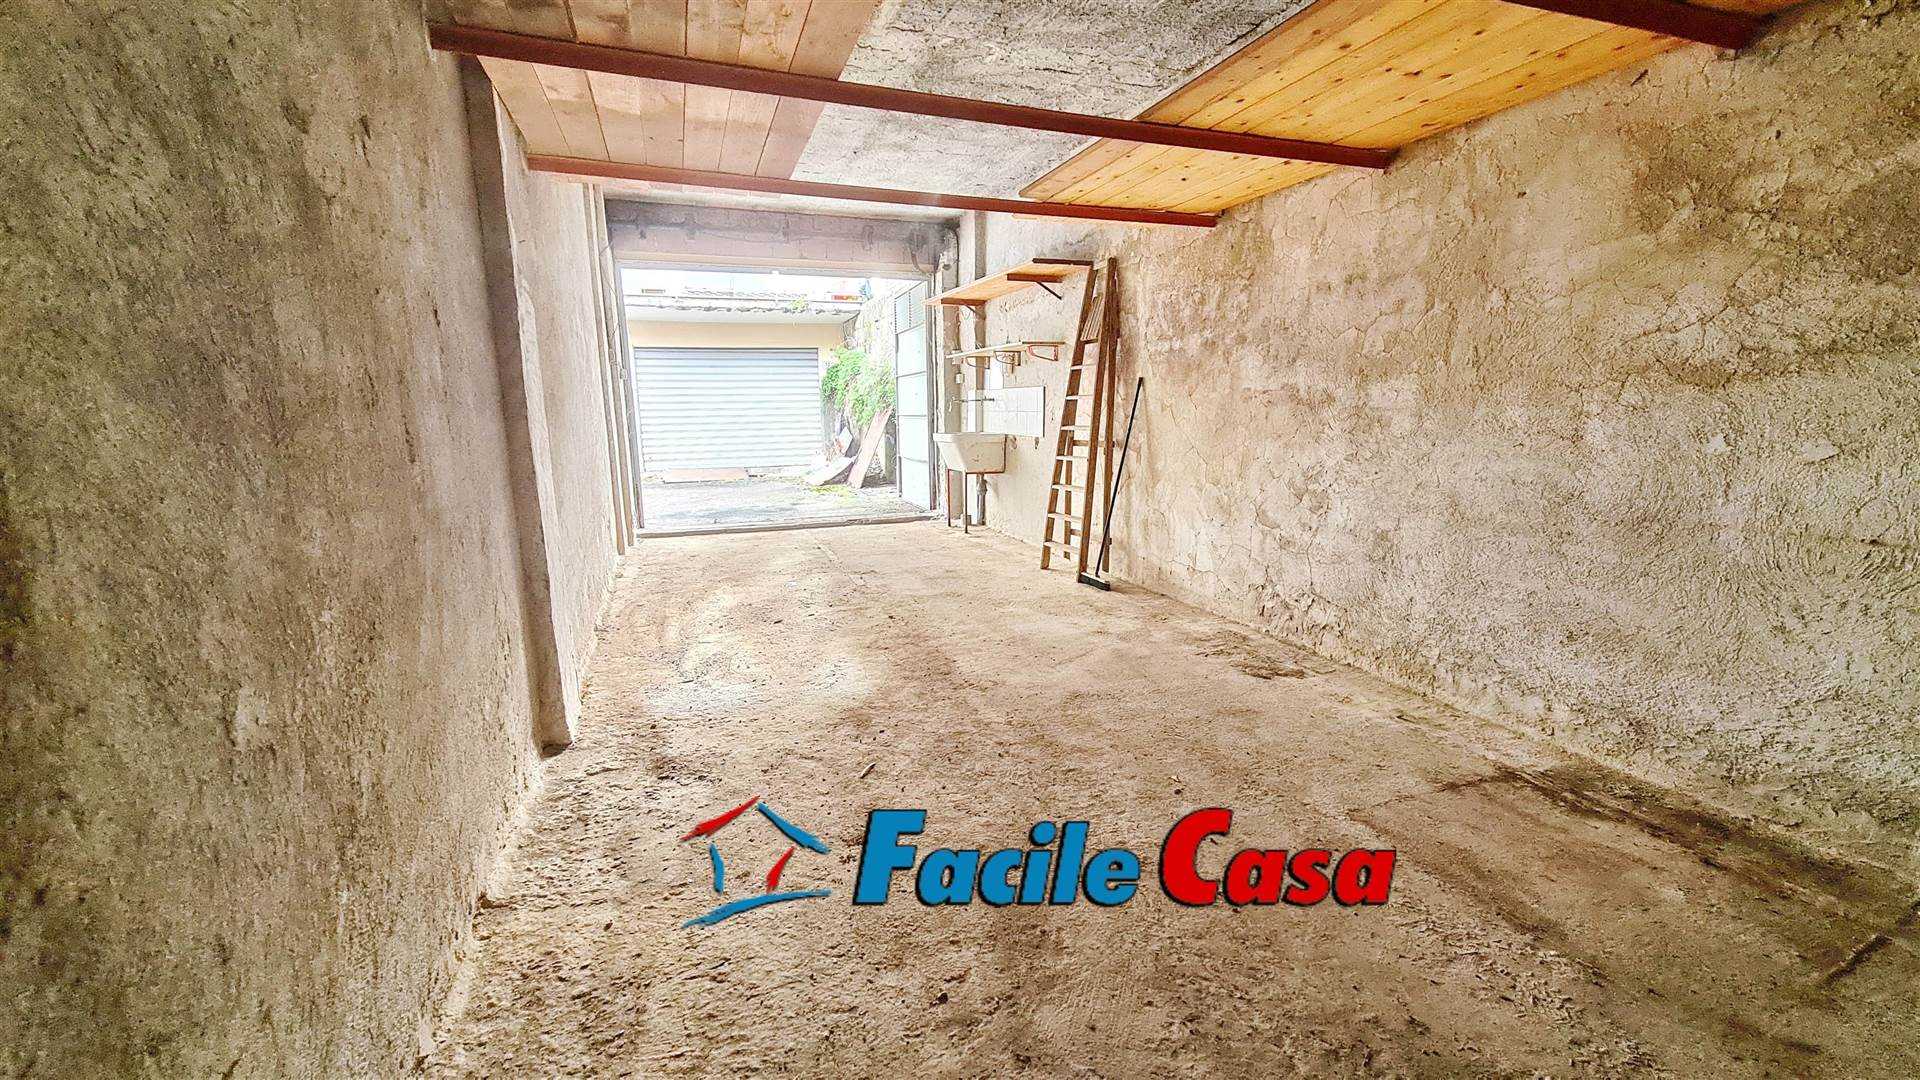 FORMIA, Garage / Parking space for sale of 30 Sq. mt., Habitable, Heating Non-existent, Energetic class: Not subject, placed at Ground, composed by: 